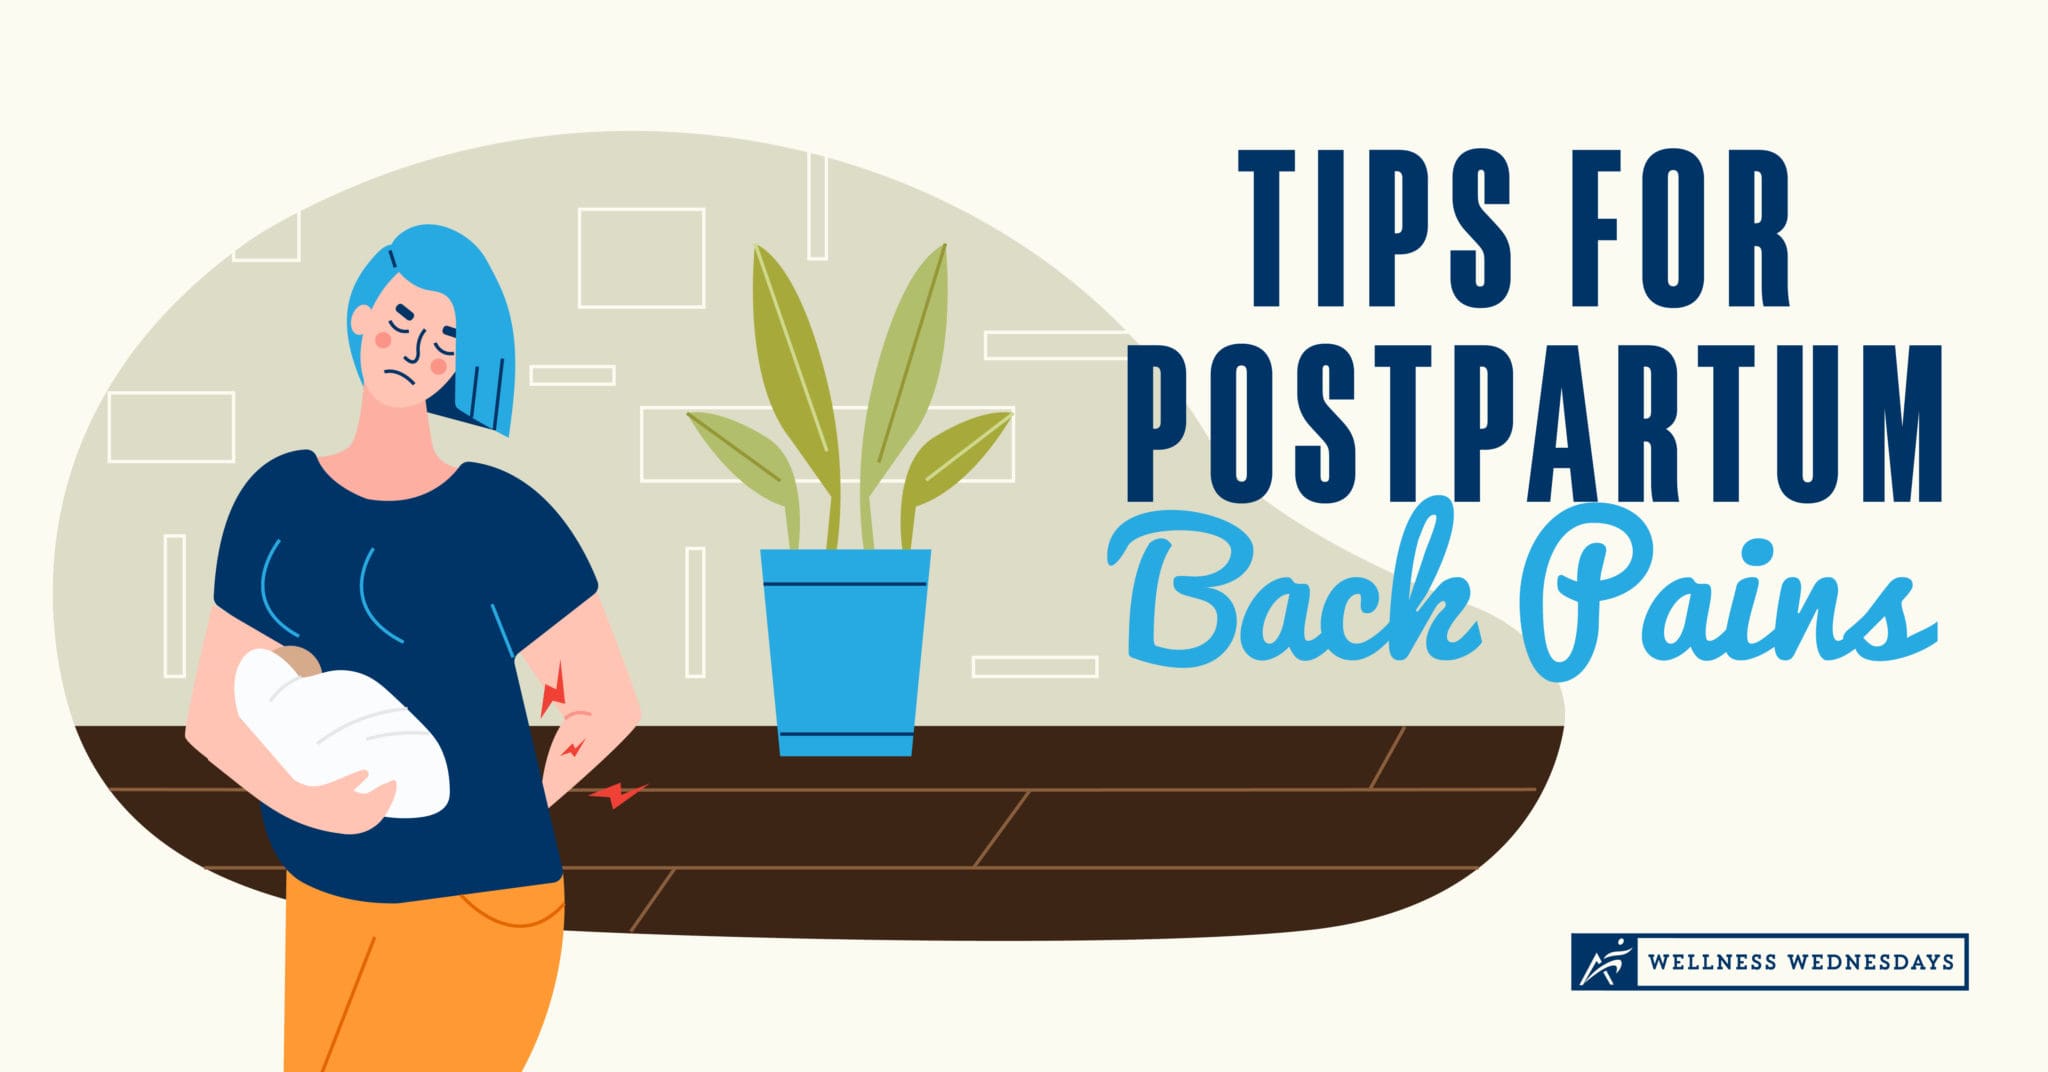 Taking back control of your postpartum life